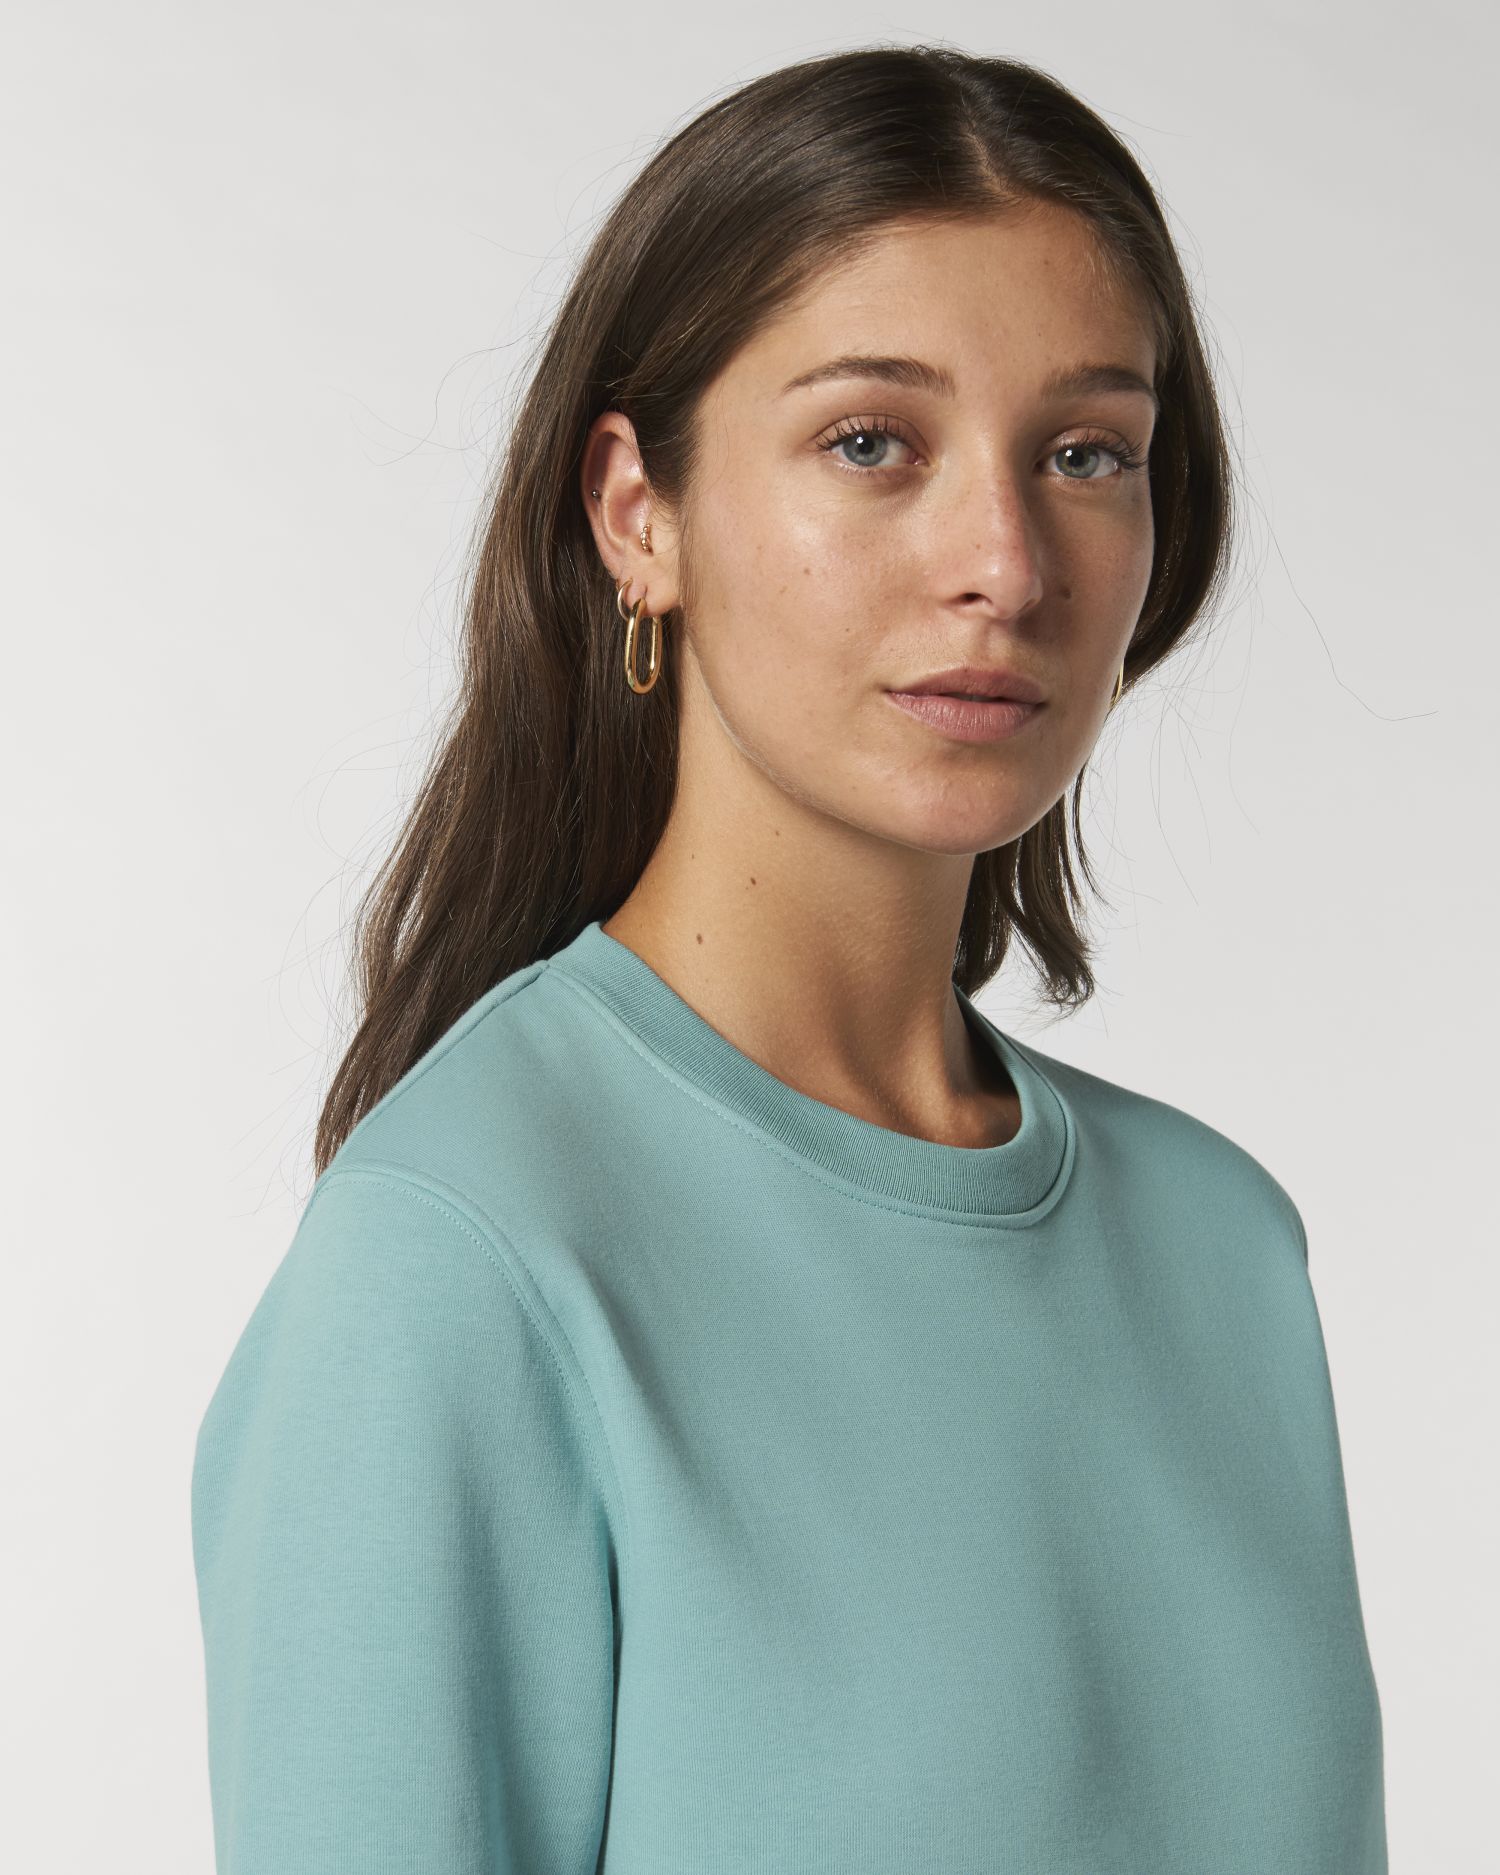 Crew neck sweatshirts Changer in Farbe Teal Monstera